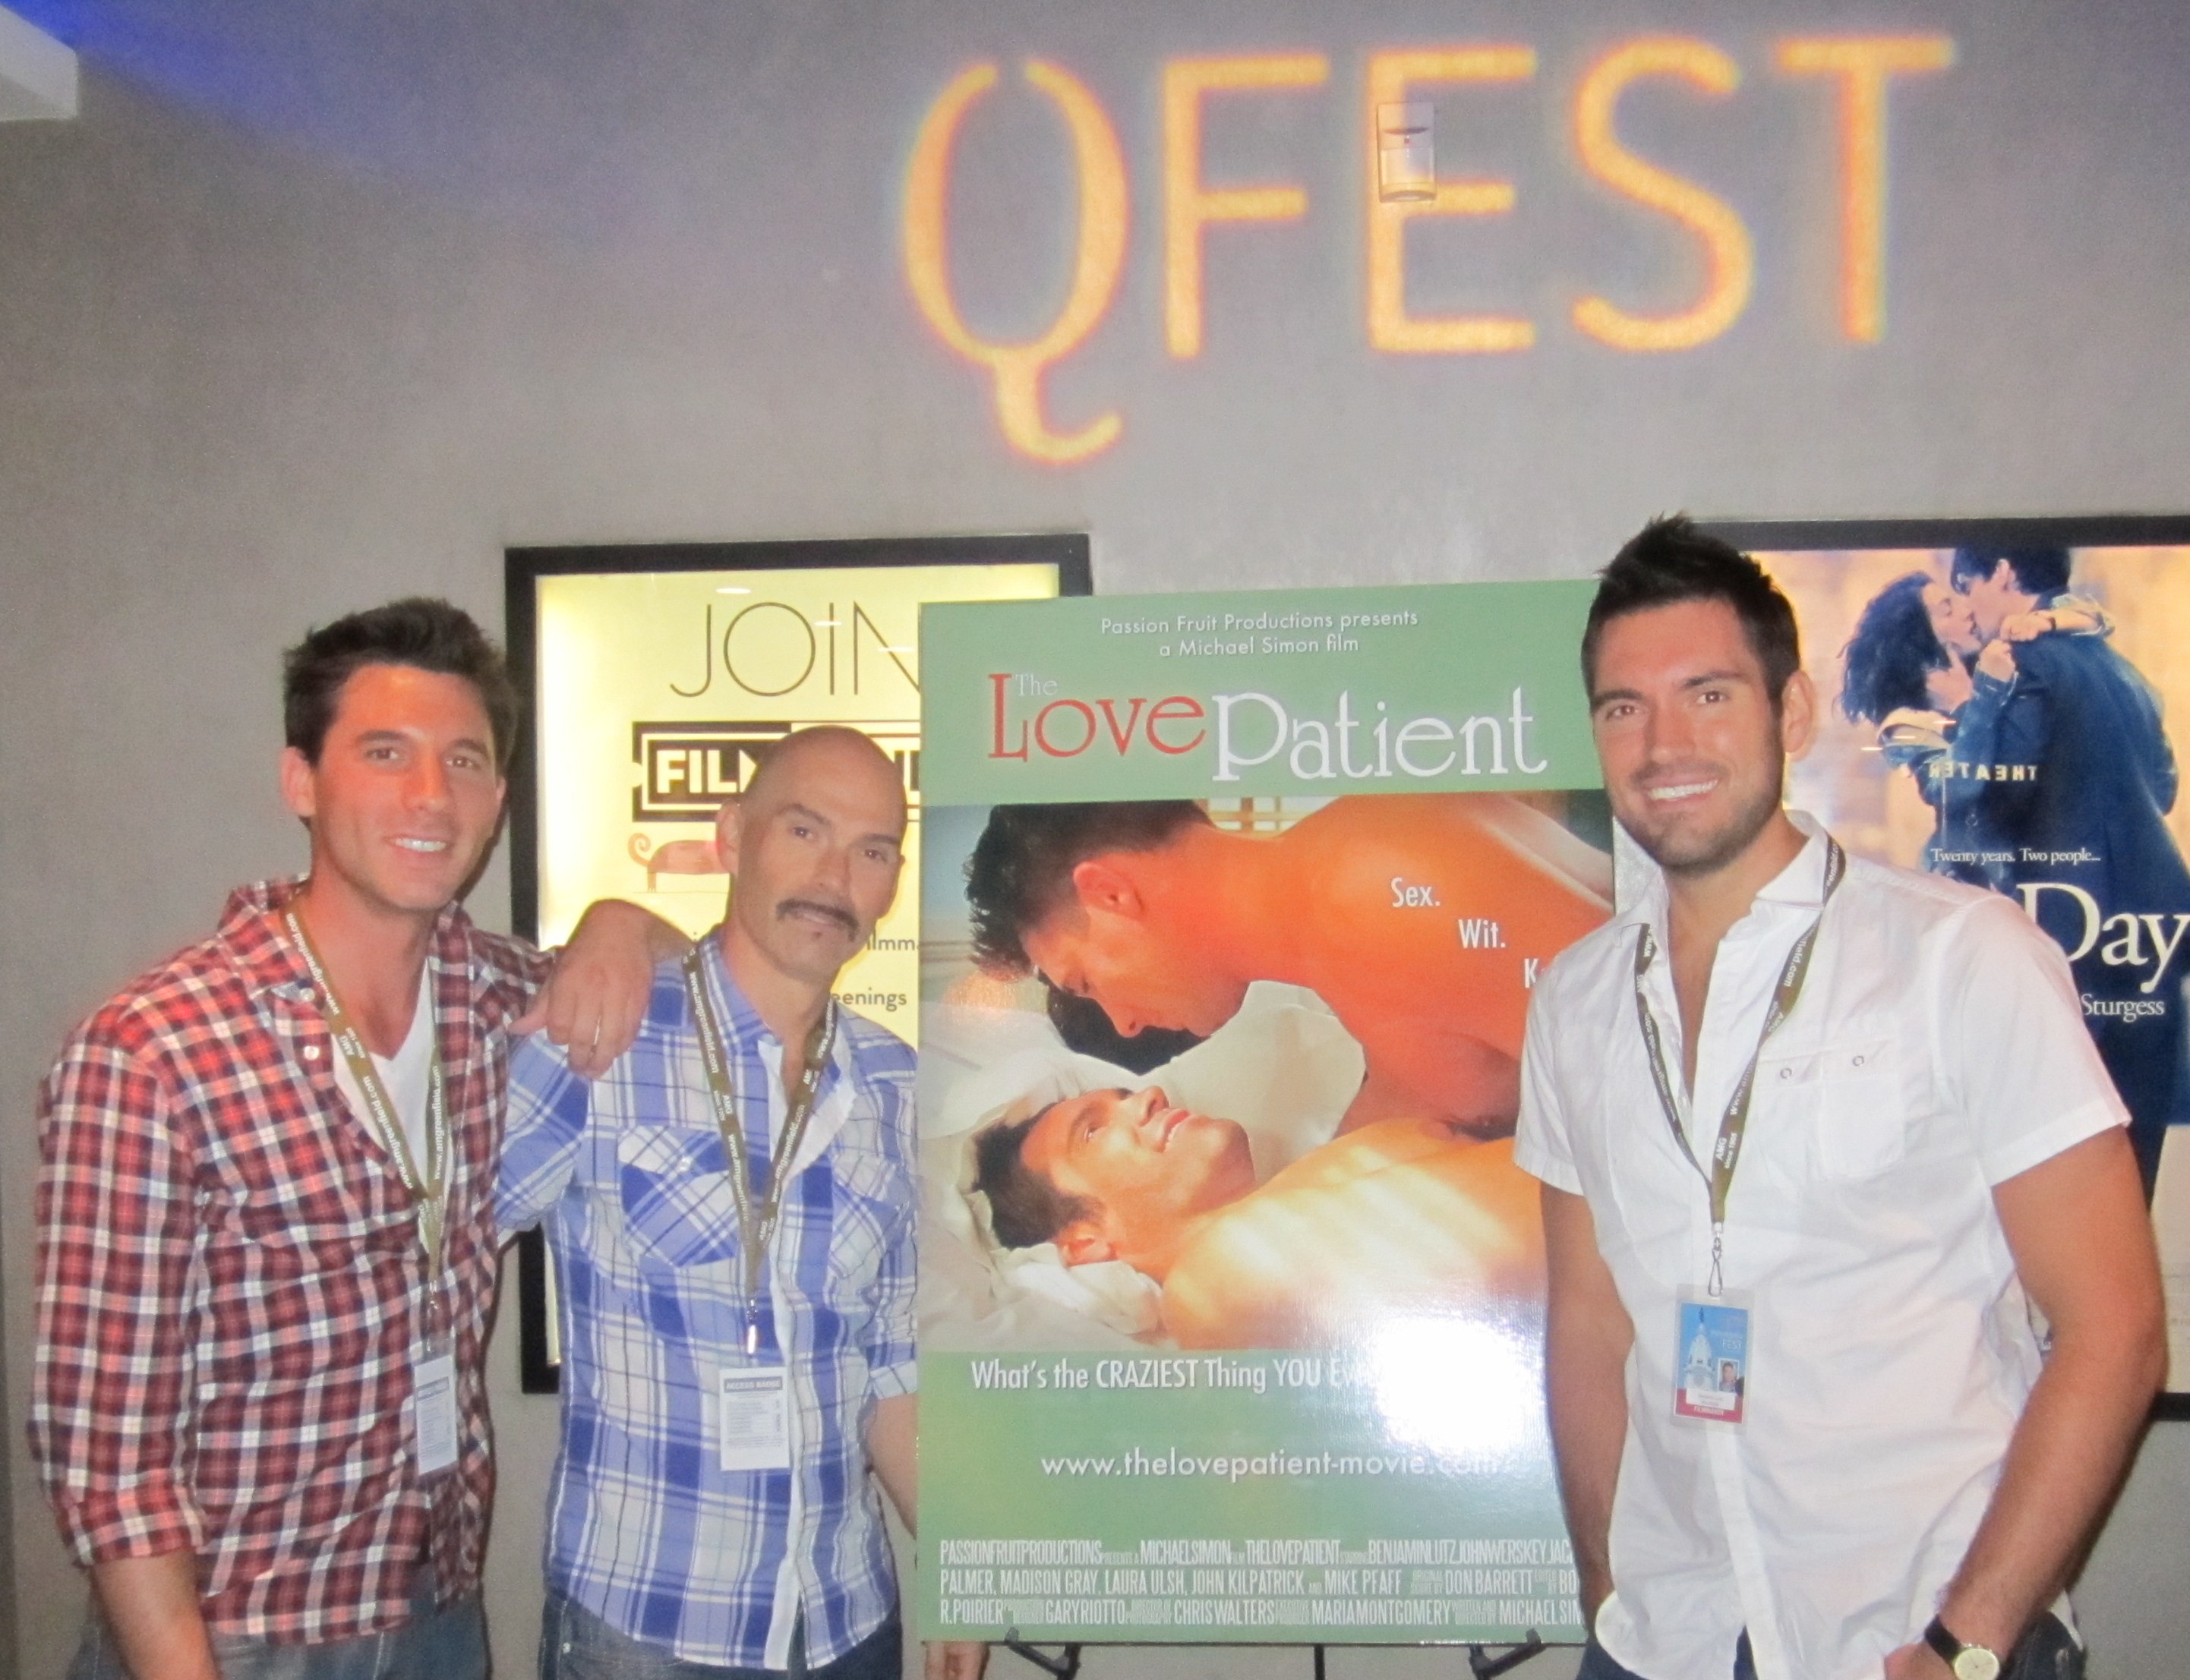 THE LOVE PATIENT world premier, Q-fest, Philadelphia, PA 2011 with director Michael Simon (Md), and Benjamin Lutz (Rt).